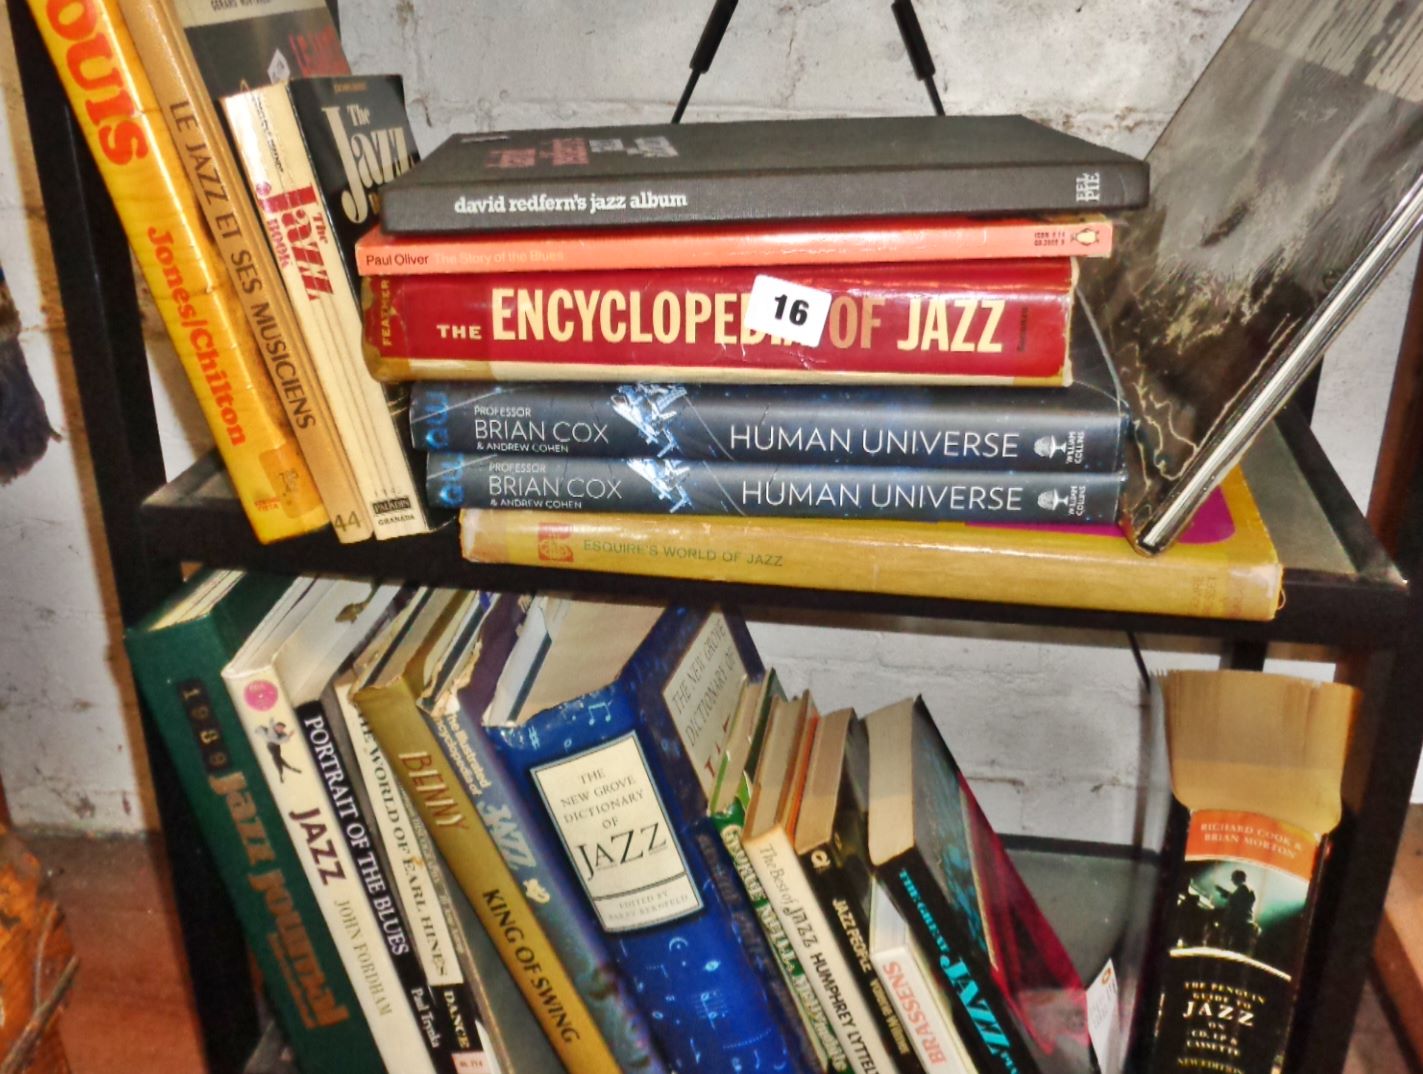 Two shelves of books on jazz and blues music